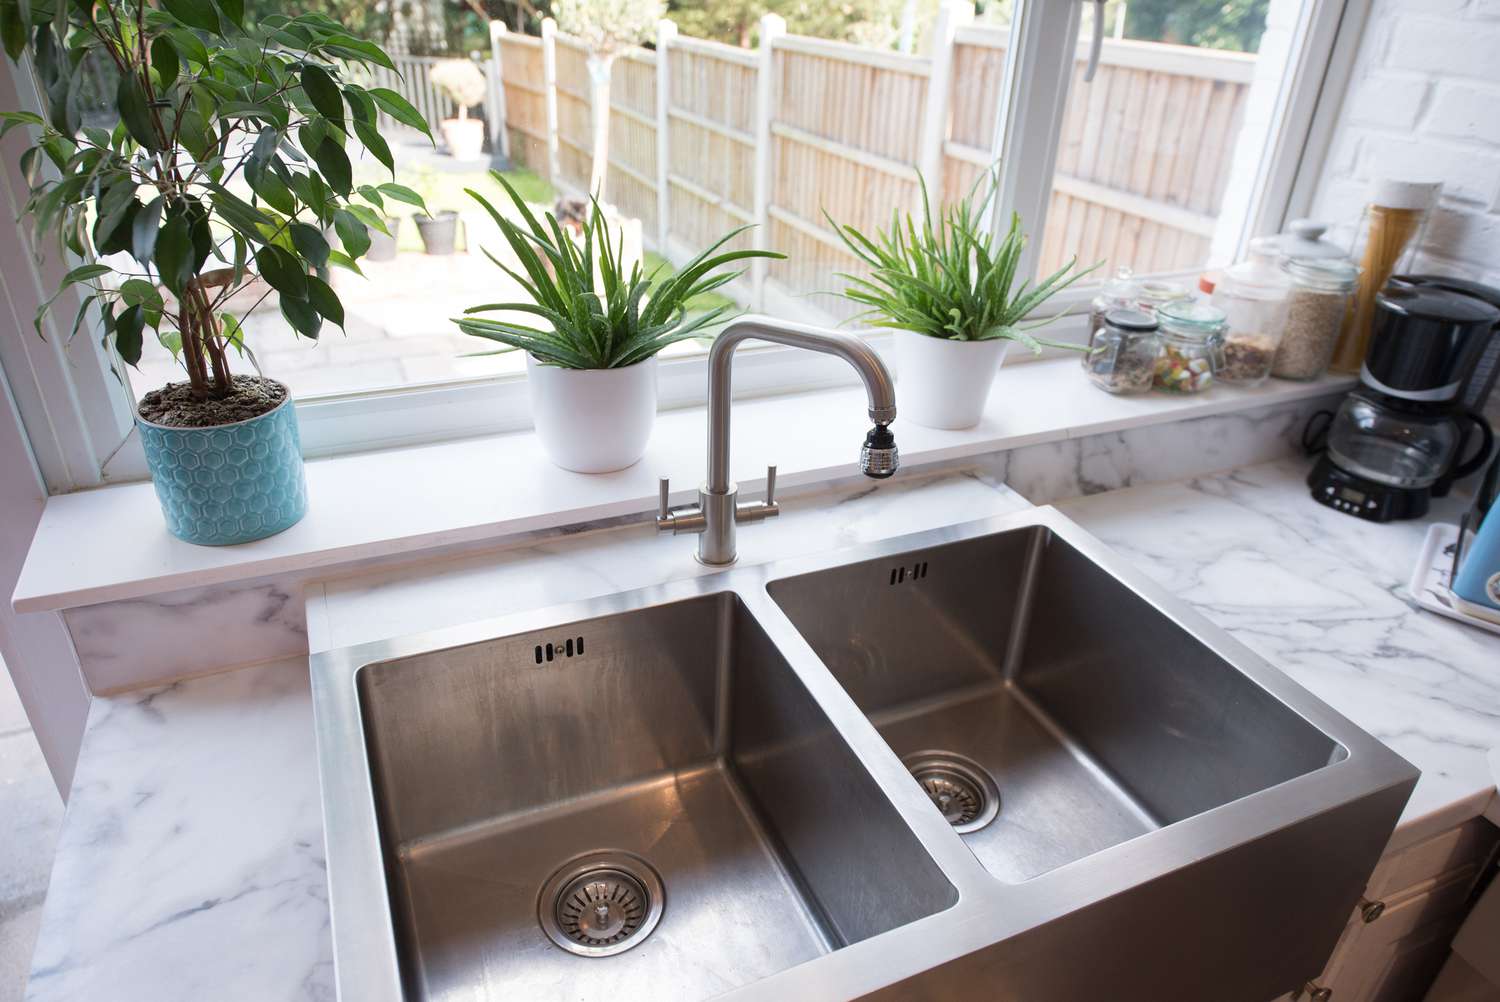 What Is The Best Type Of Sink For A Kitchen